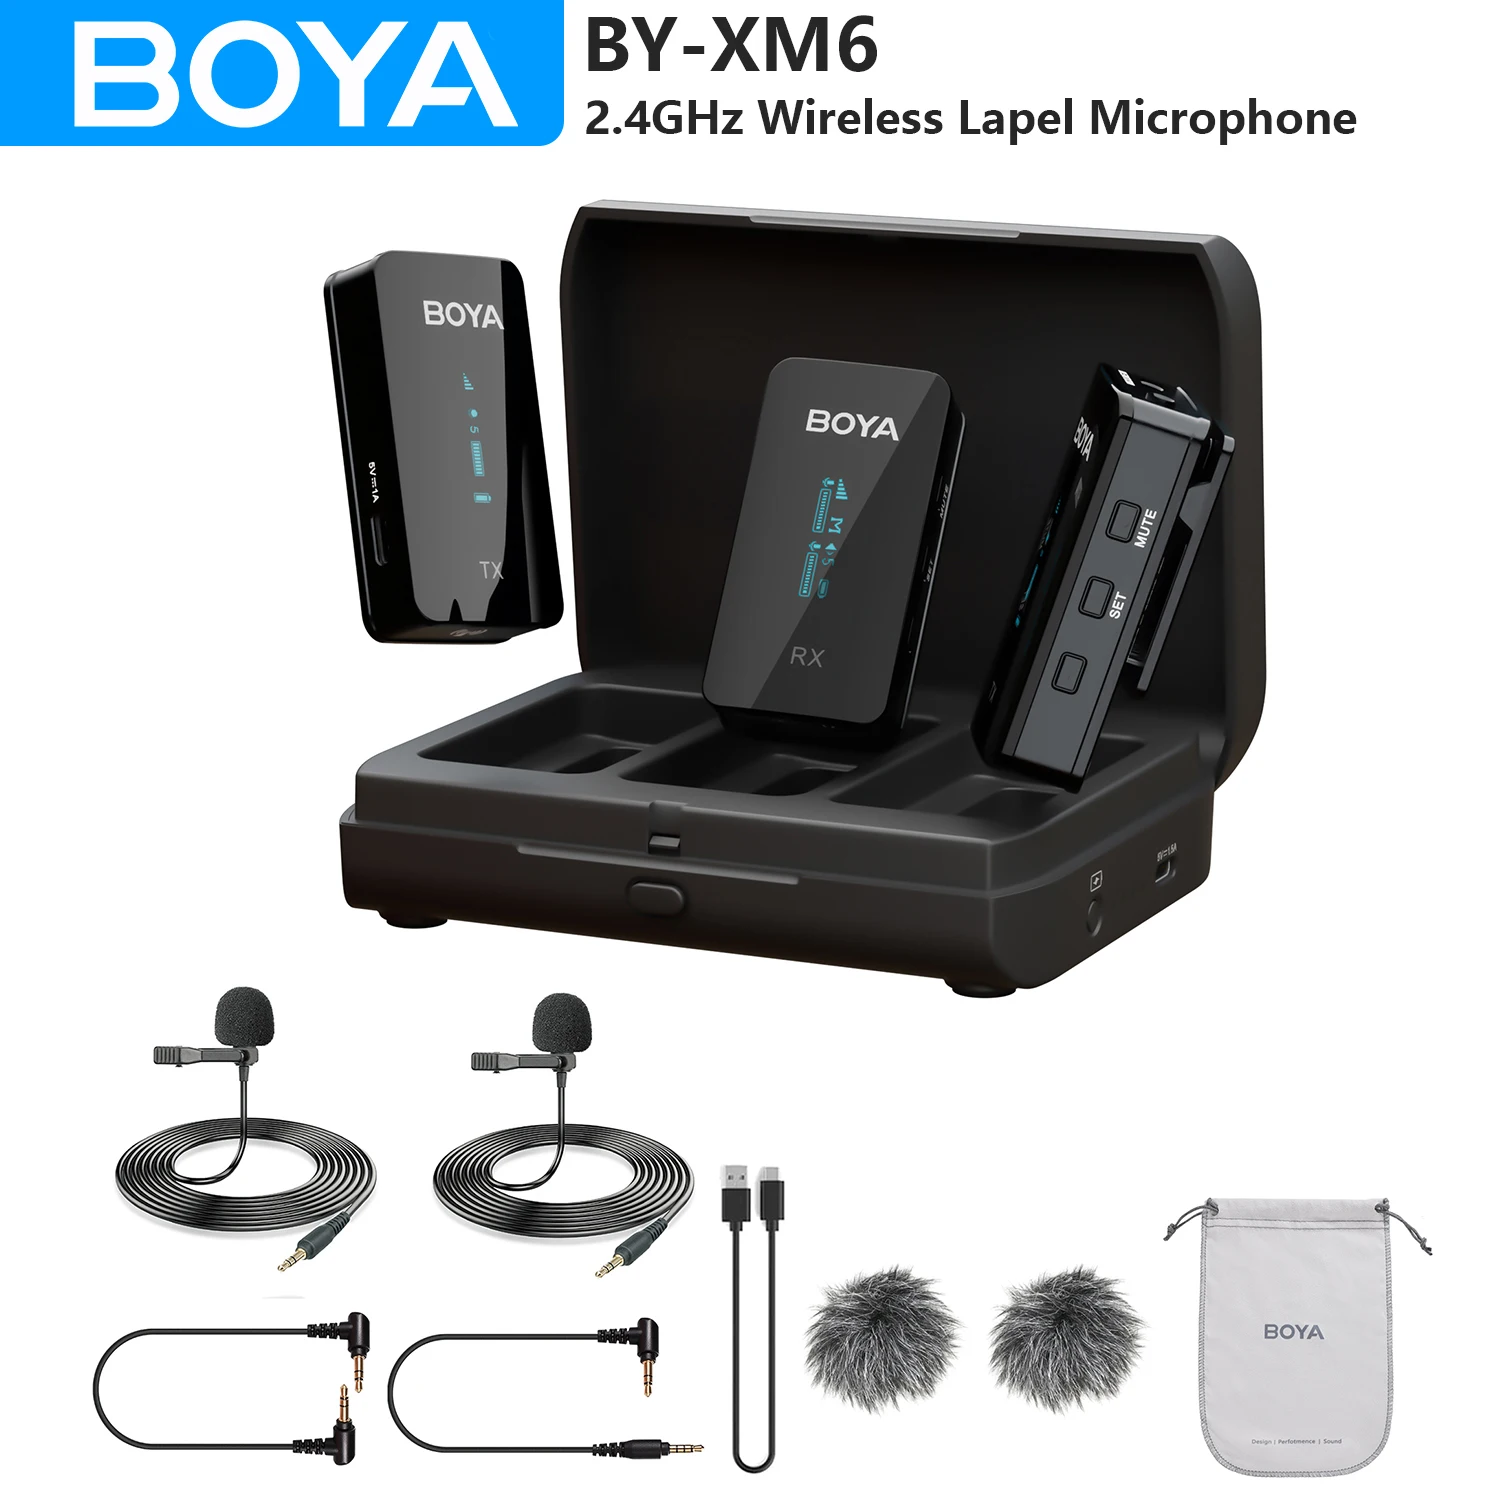 

BOYA BY-XM6 K Wireless Lavalier Lapel Microphone for iPhone Android Cell Phone PC DSLR Cameras Live Streaming Youtube Recording